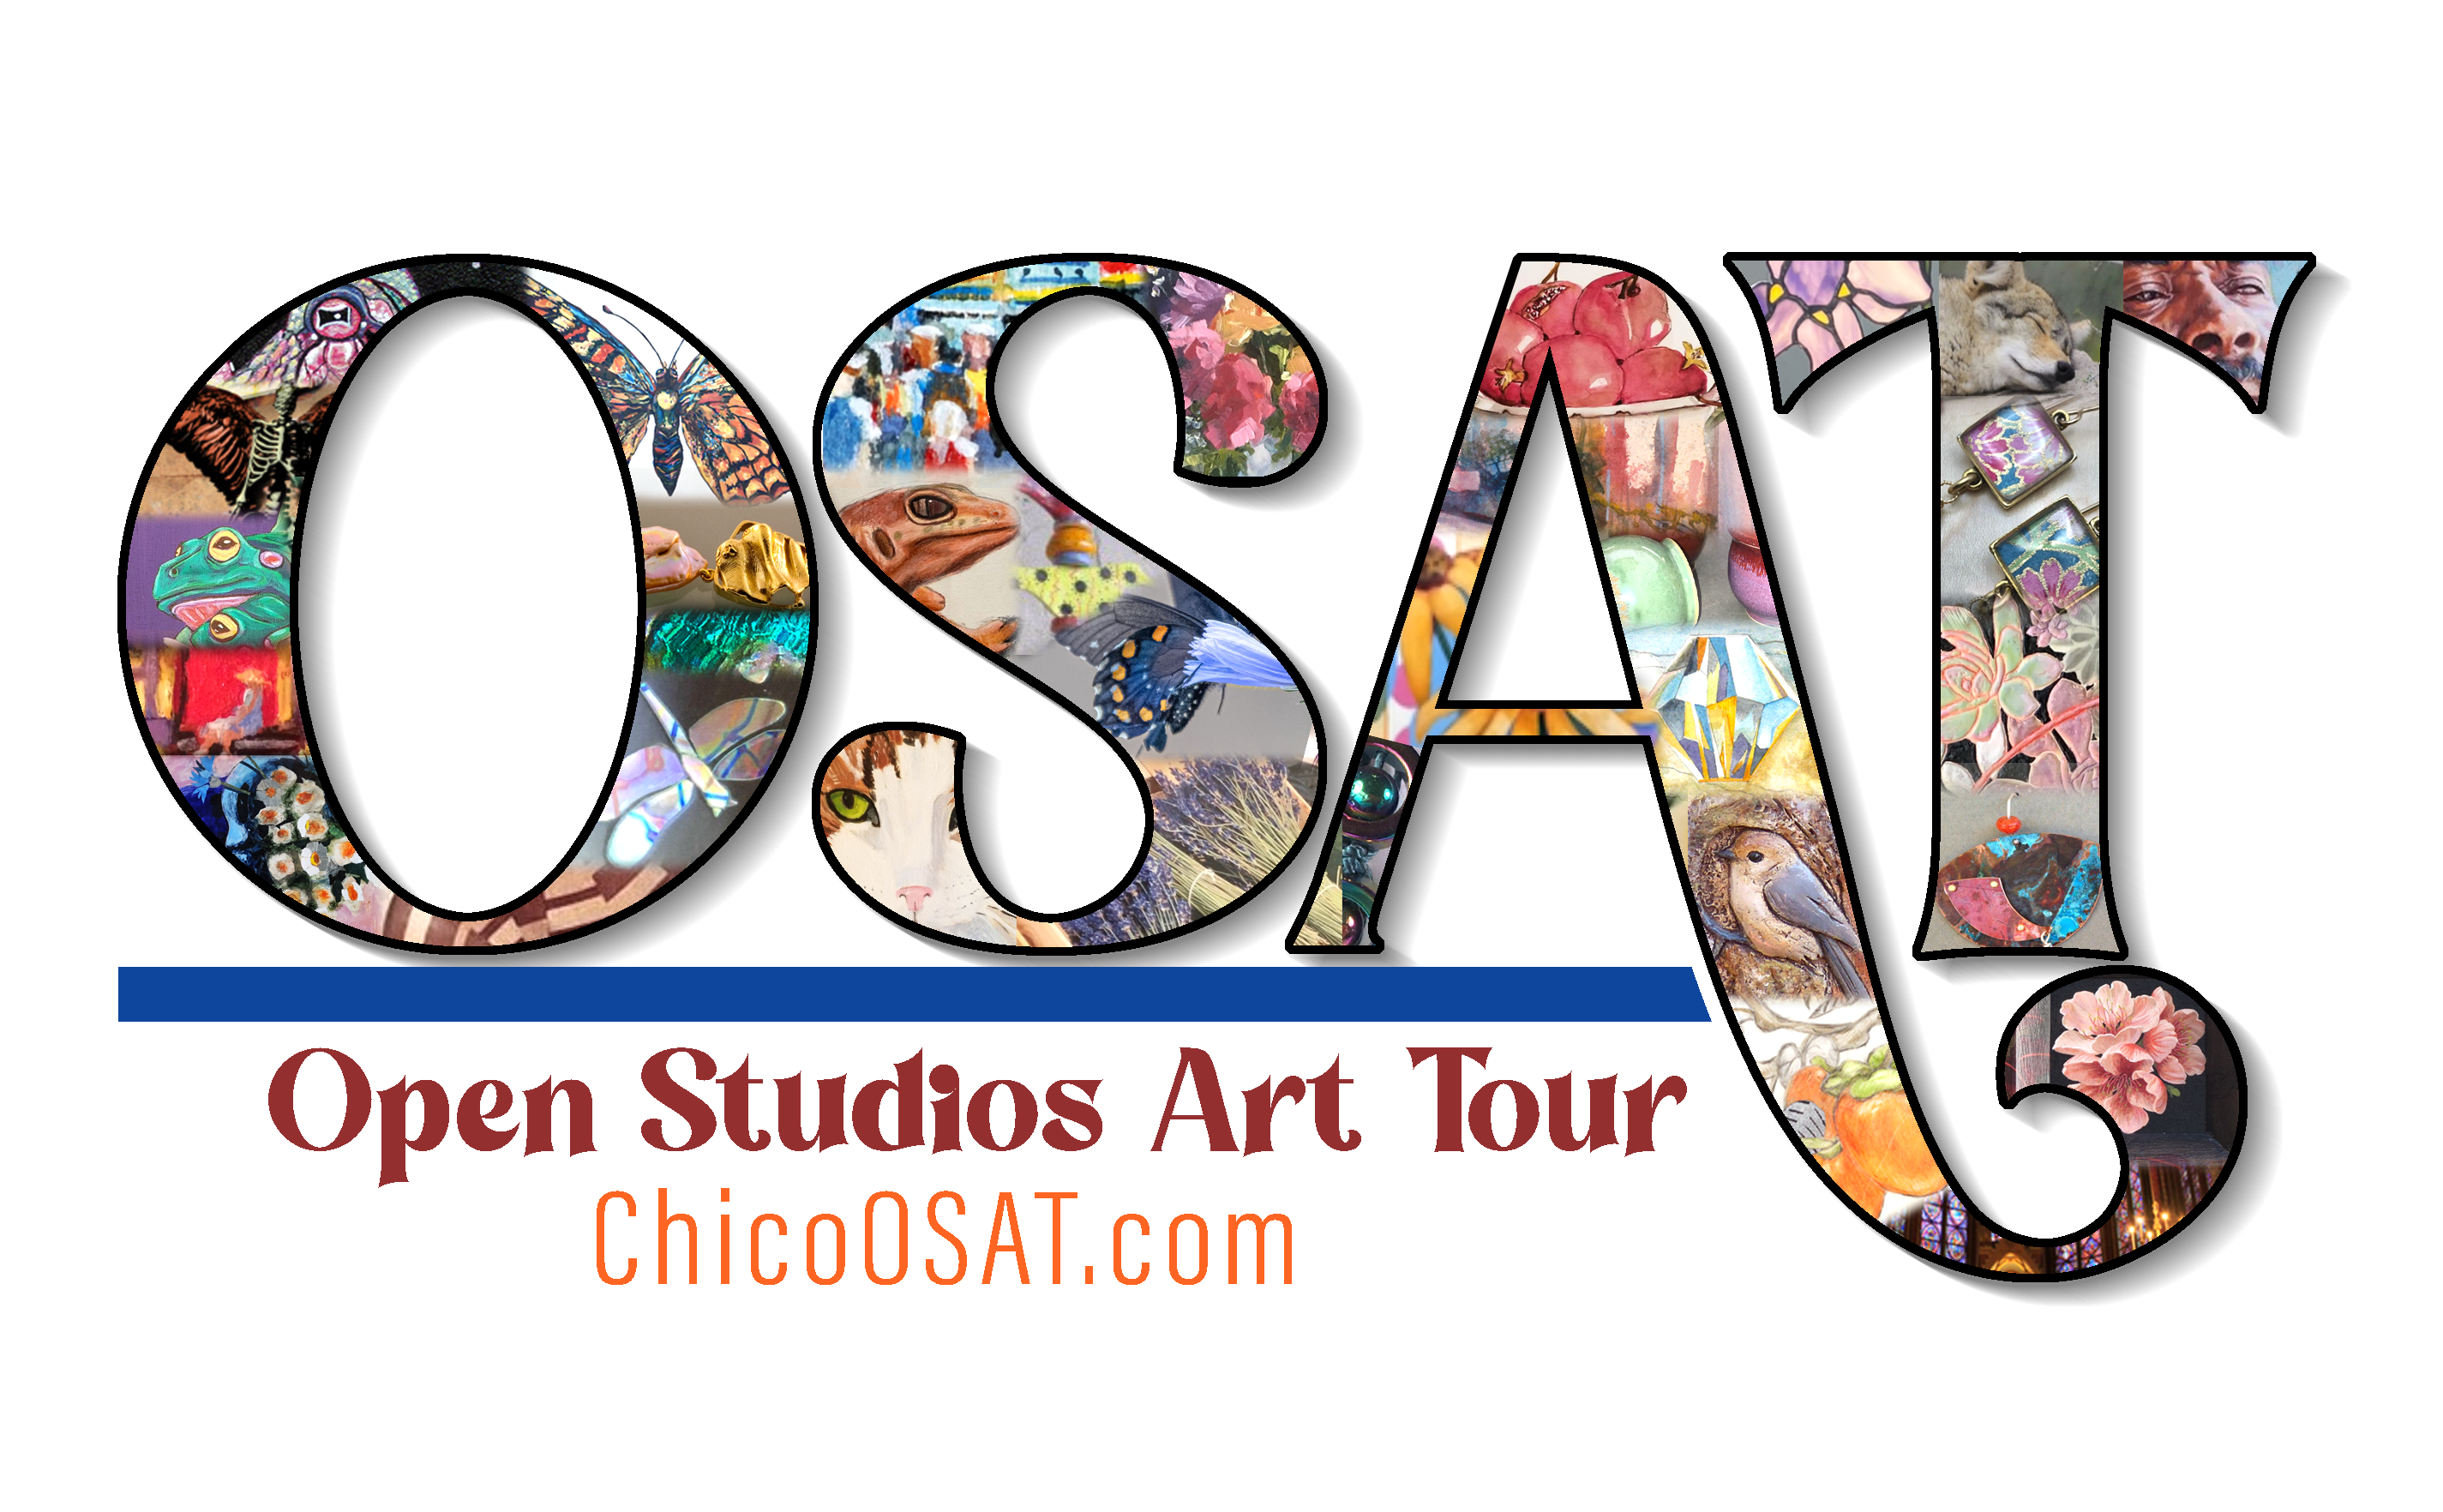 Annual Cache Valley studio tour offers glimpse into artists' craft